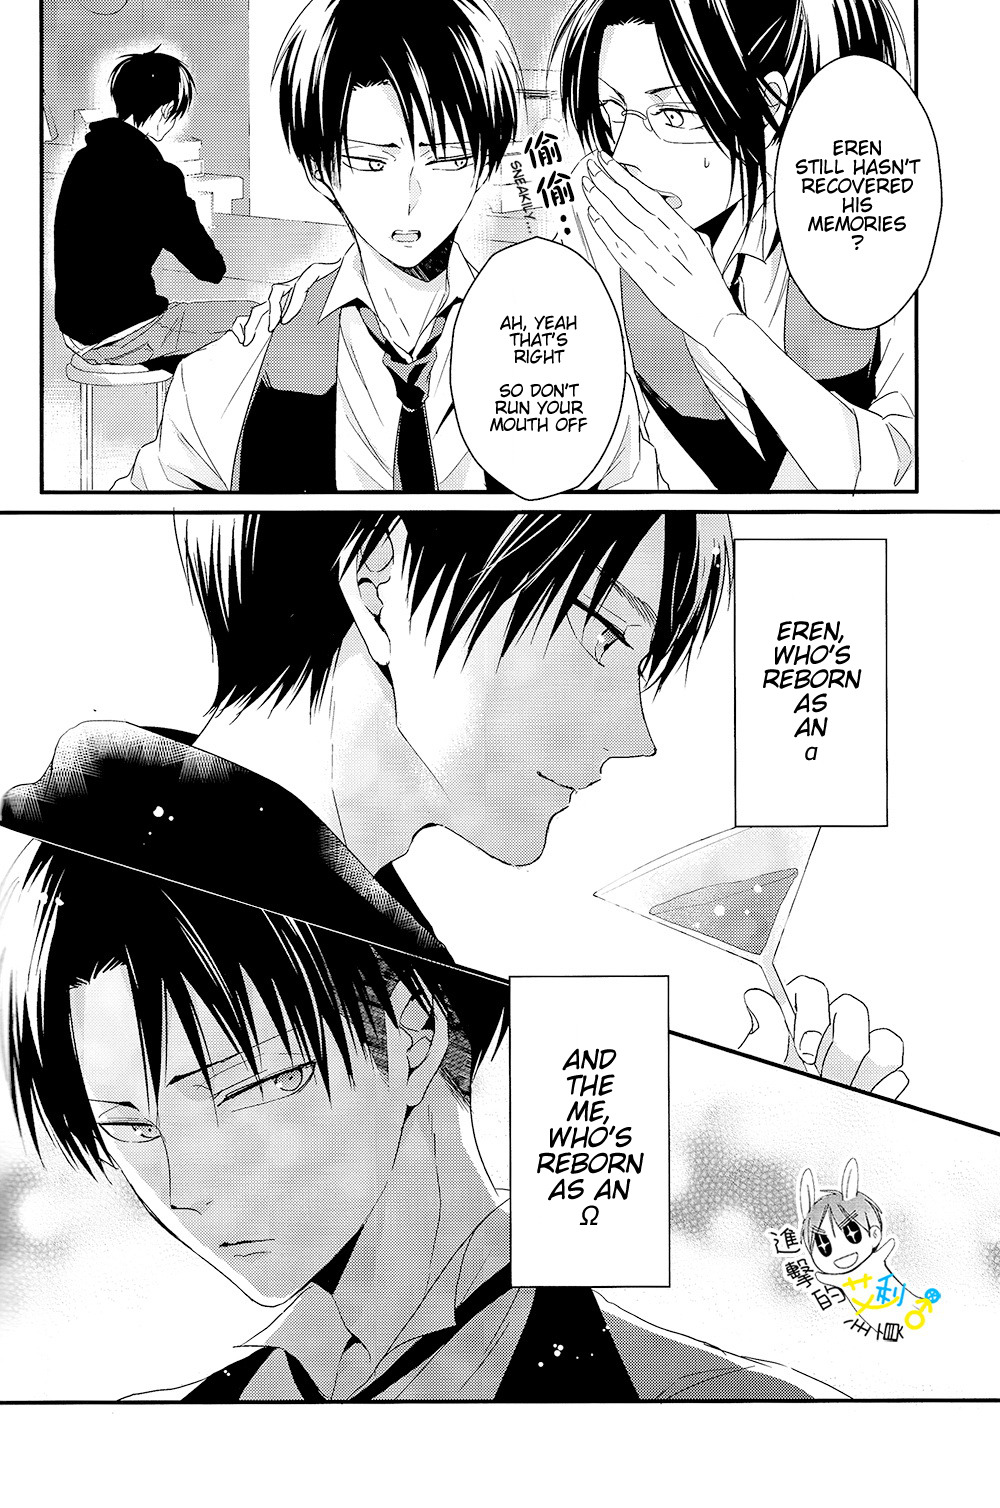 Eren/Levi Are My Heart And Soul? — [Unap!/Maine] Uncontrol [Eng]